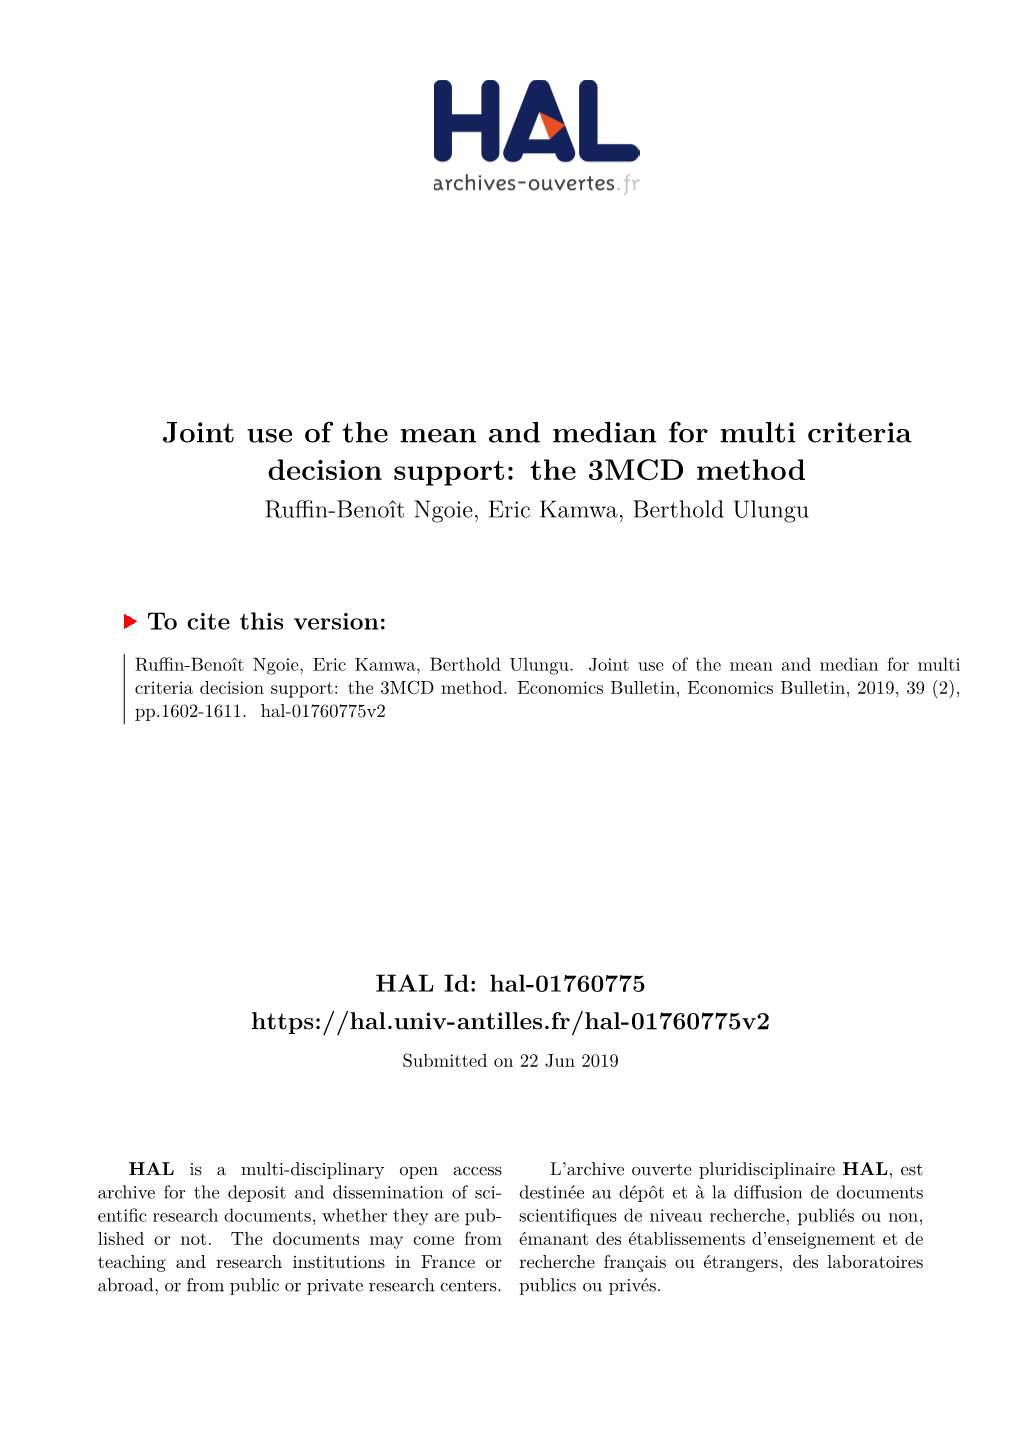 Joint Use of the Mean and Median for Multi Criteria Decision Support: the 3MCD Method Ruﬀin-Benoît Ngoie, Eric Kamwa, Berthold Ulungu